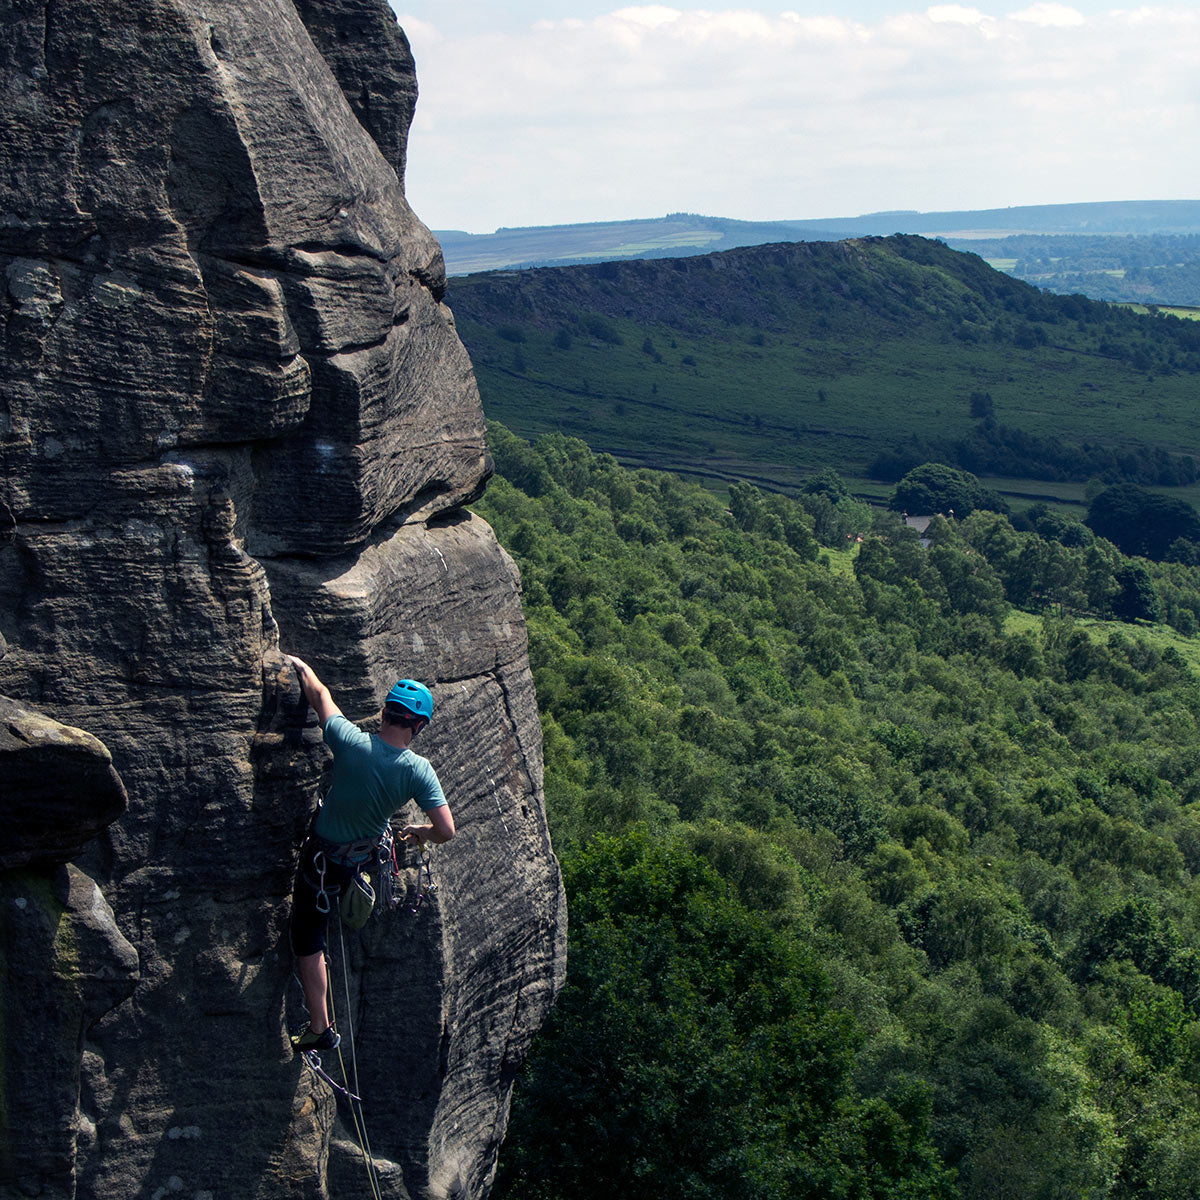 Climber high on exposed gritstone climb in the Peak District